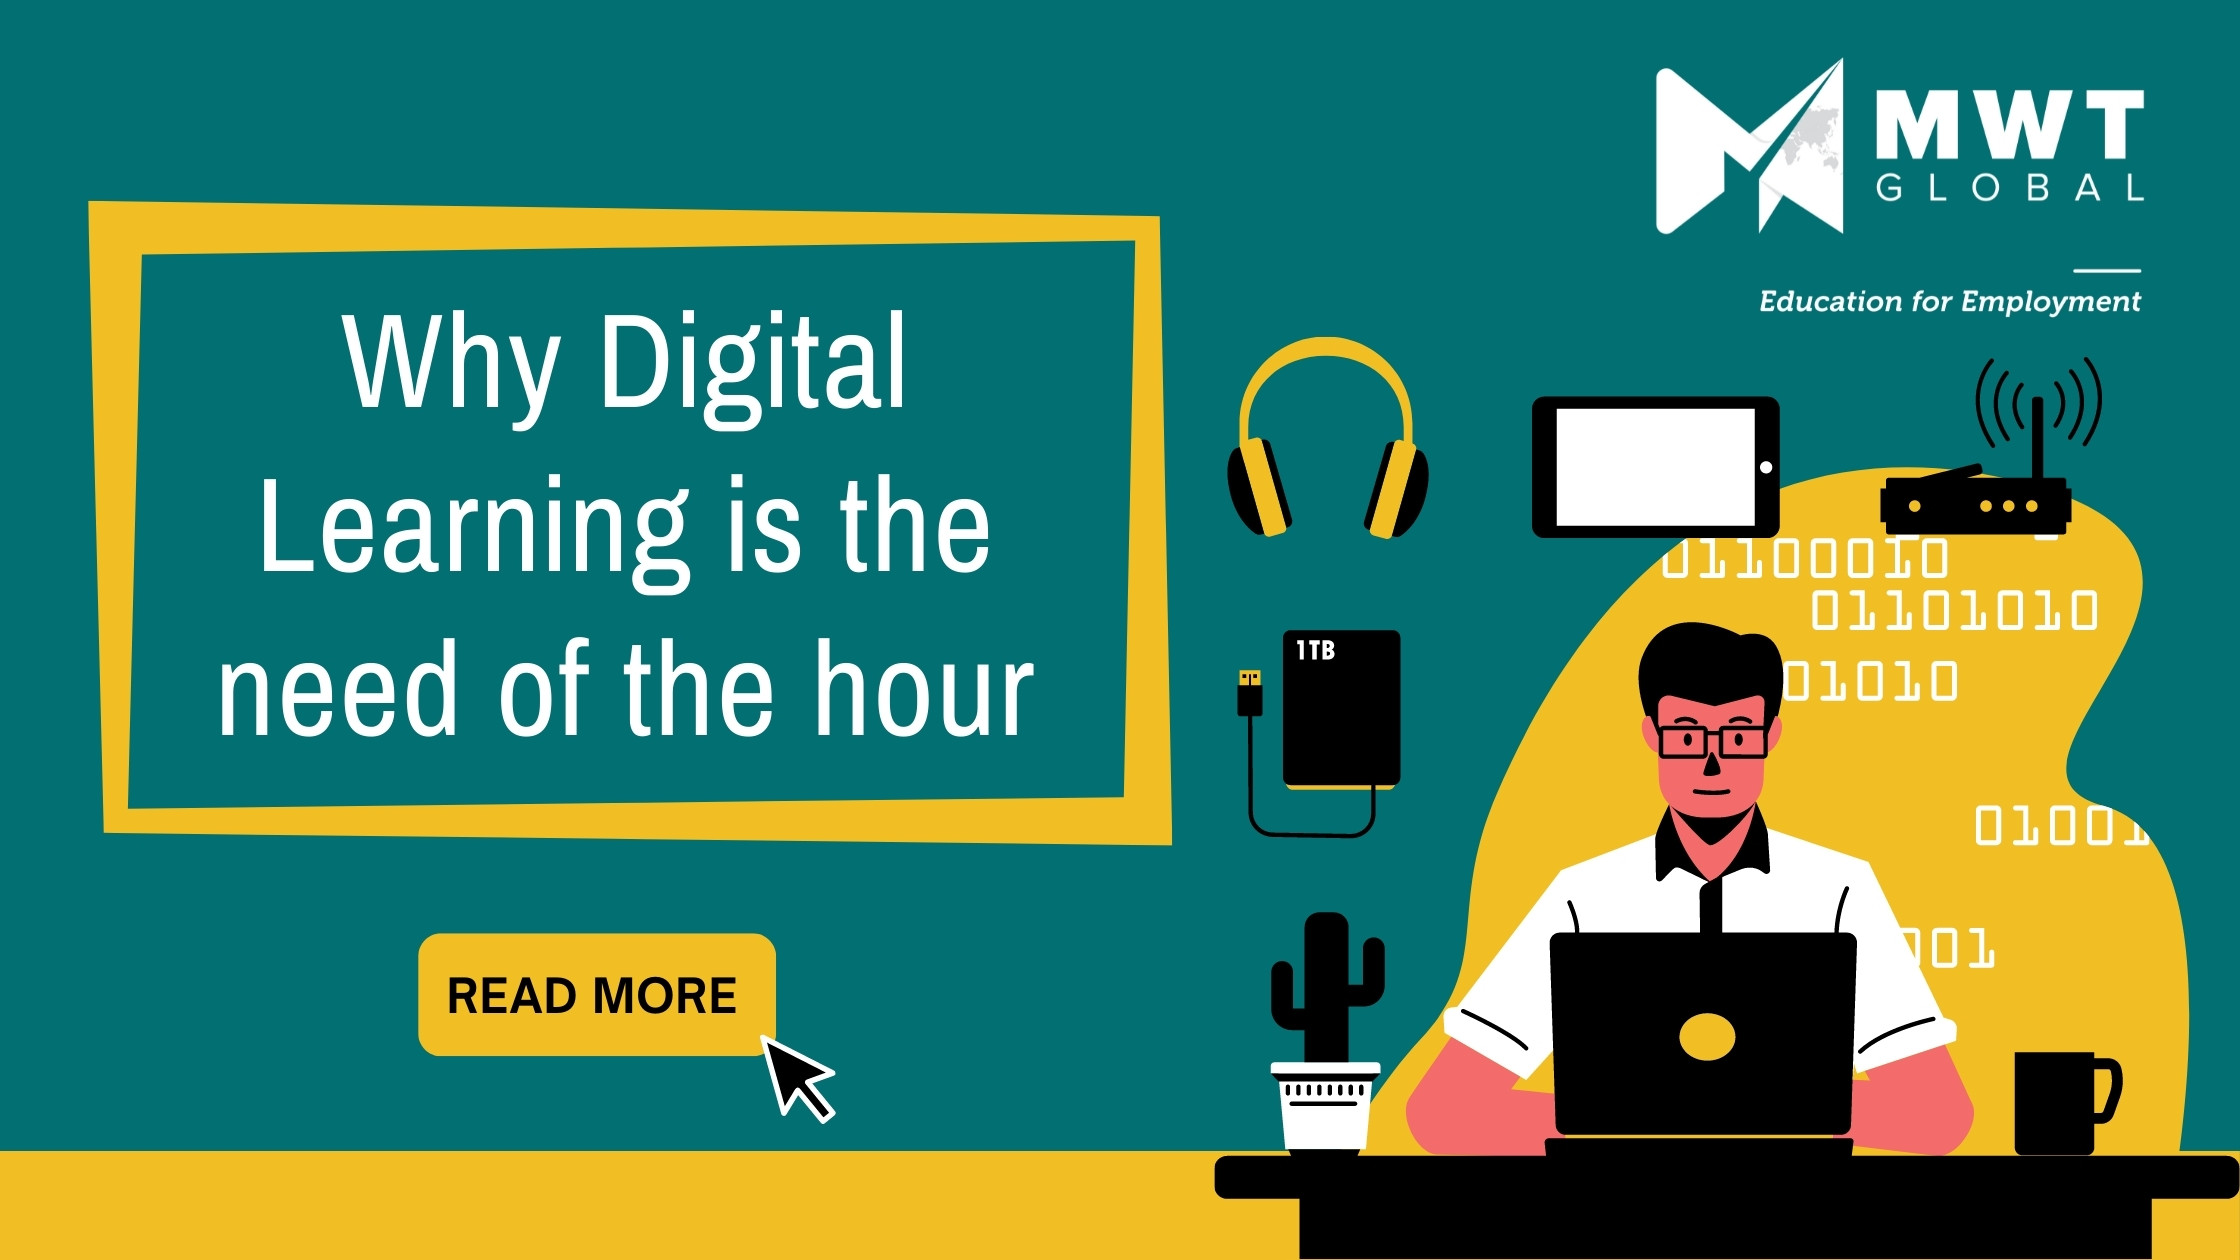 What makes digital learning the need of the hour